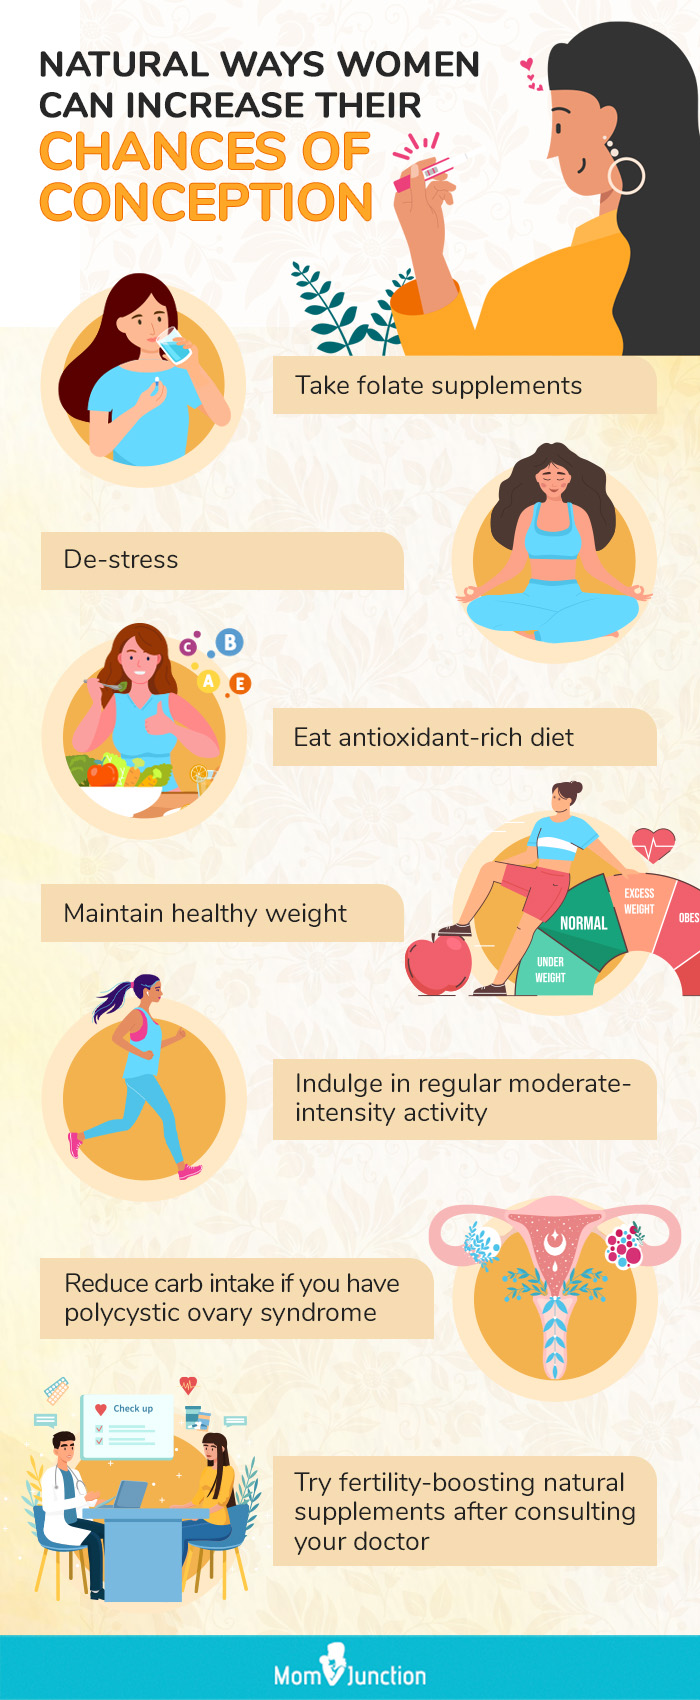 natural ways women can increase their chances of conception (infographic)